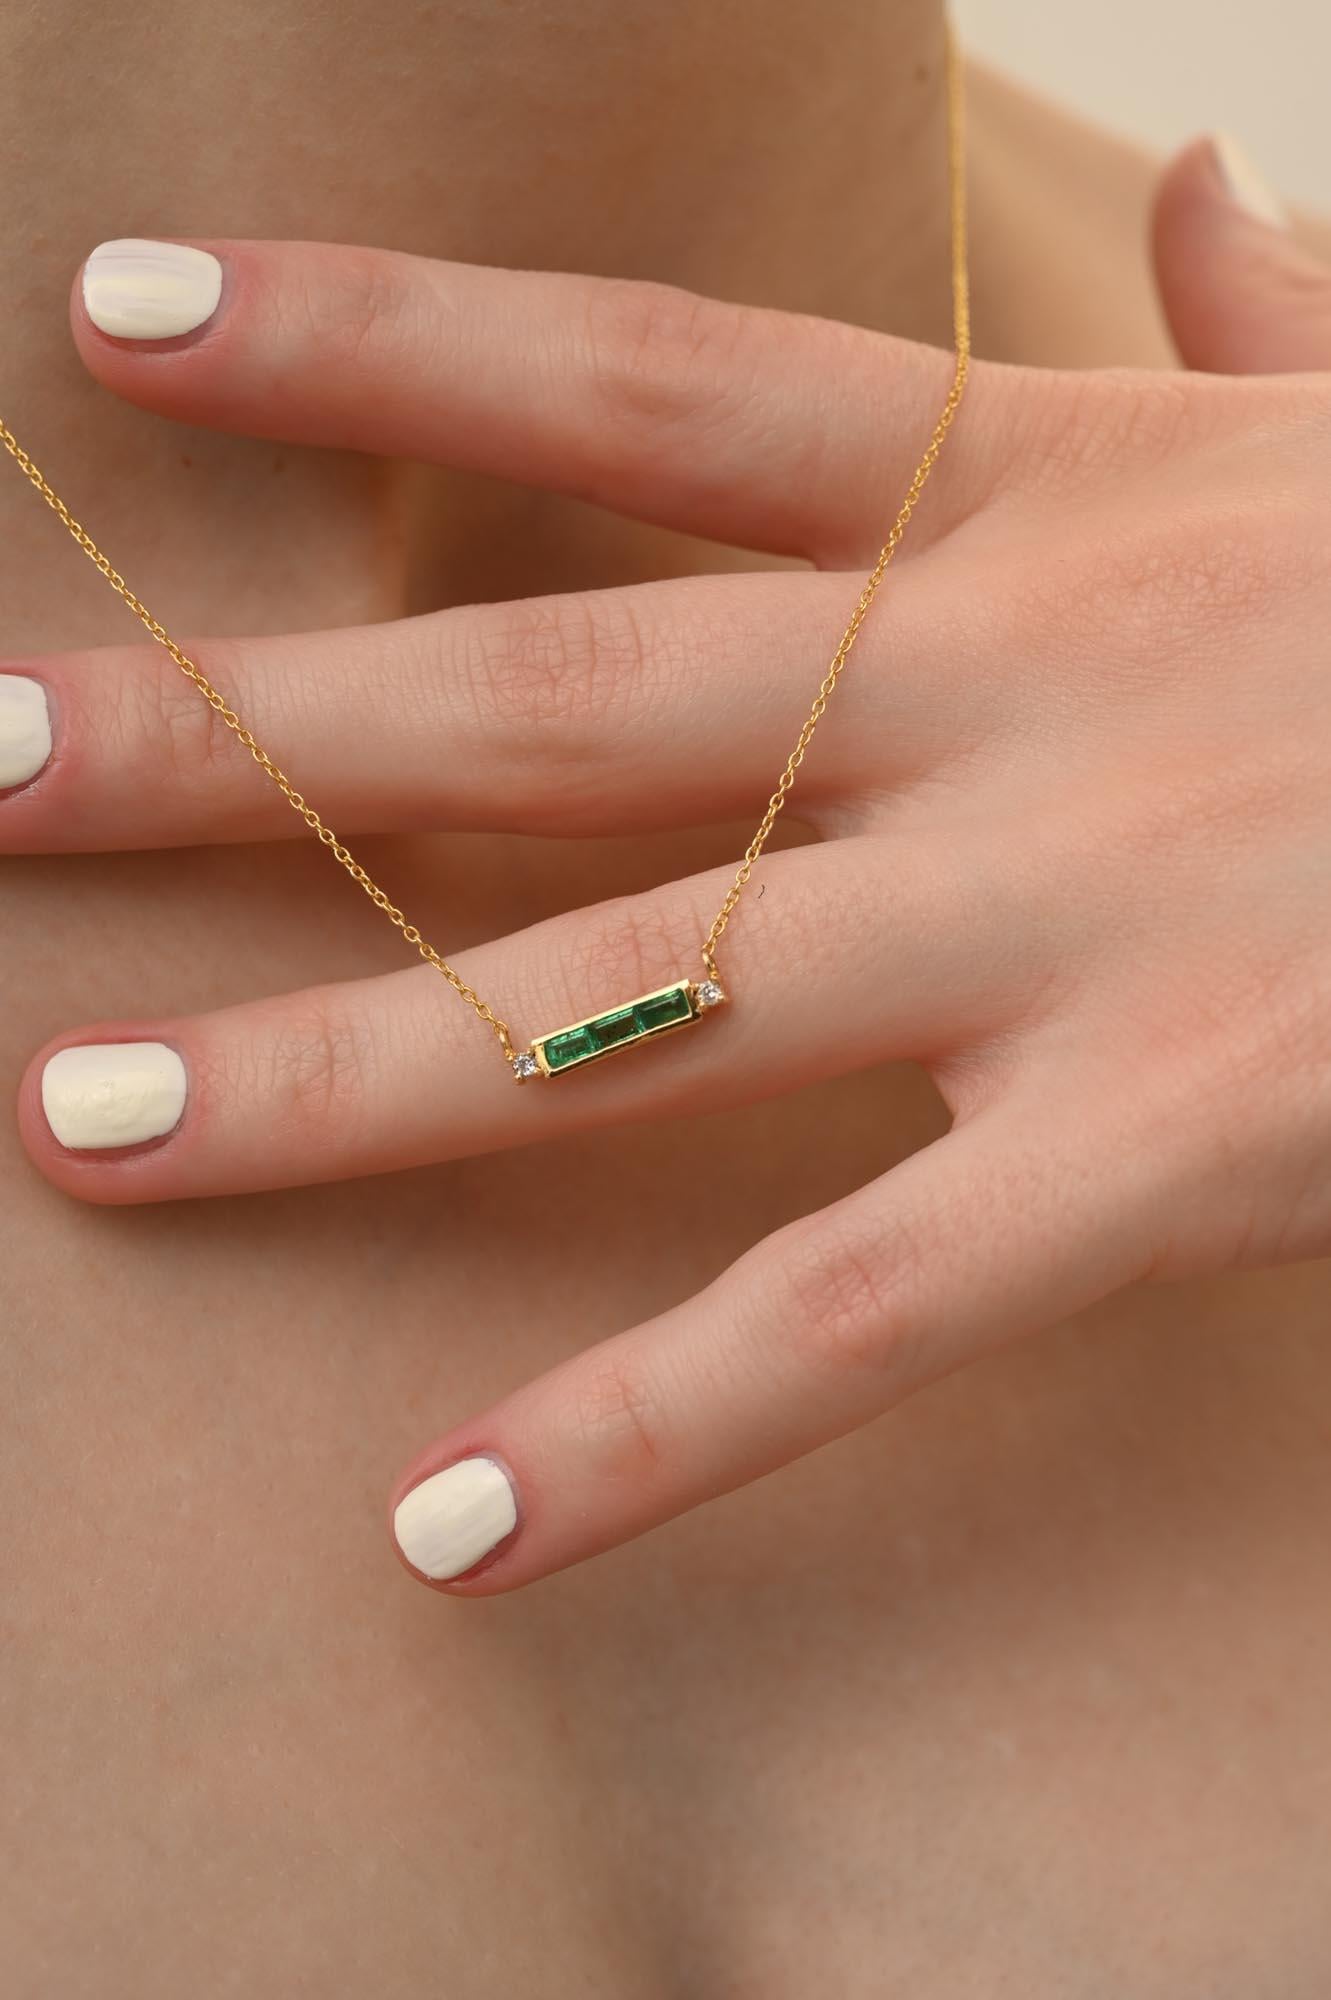 Diamond Emerald Baguette Bar Necklace in 14K Gold studded with baguette cut emerald. This stunning piece of jewelry instantly elevates a casual look or dressy outfit. 
Emerald enhances the intellectual capacity. 
Designed with baguette cut emerald